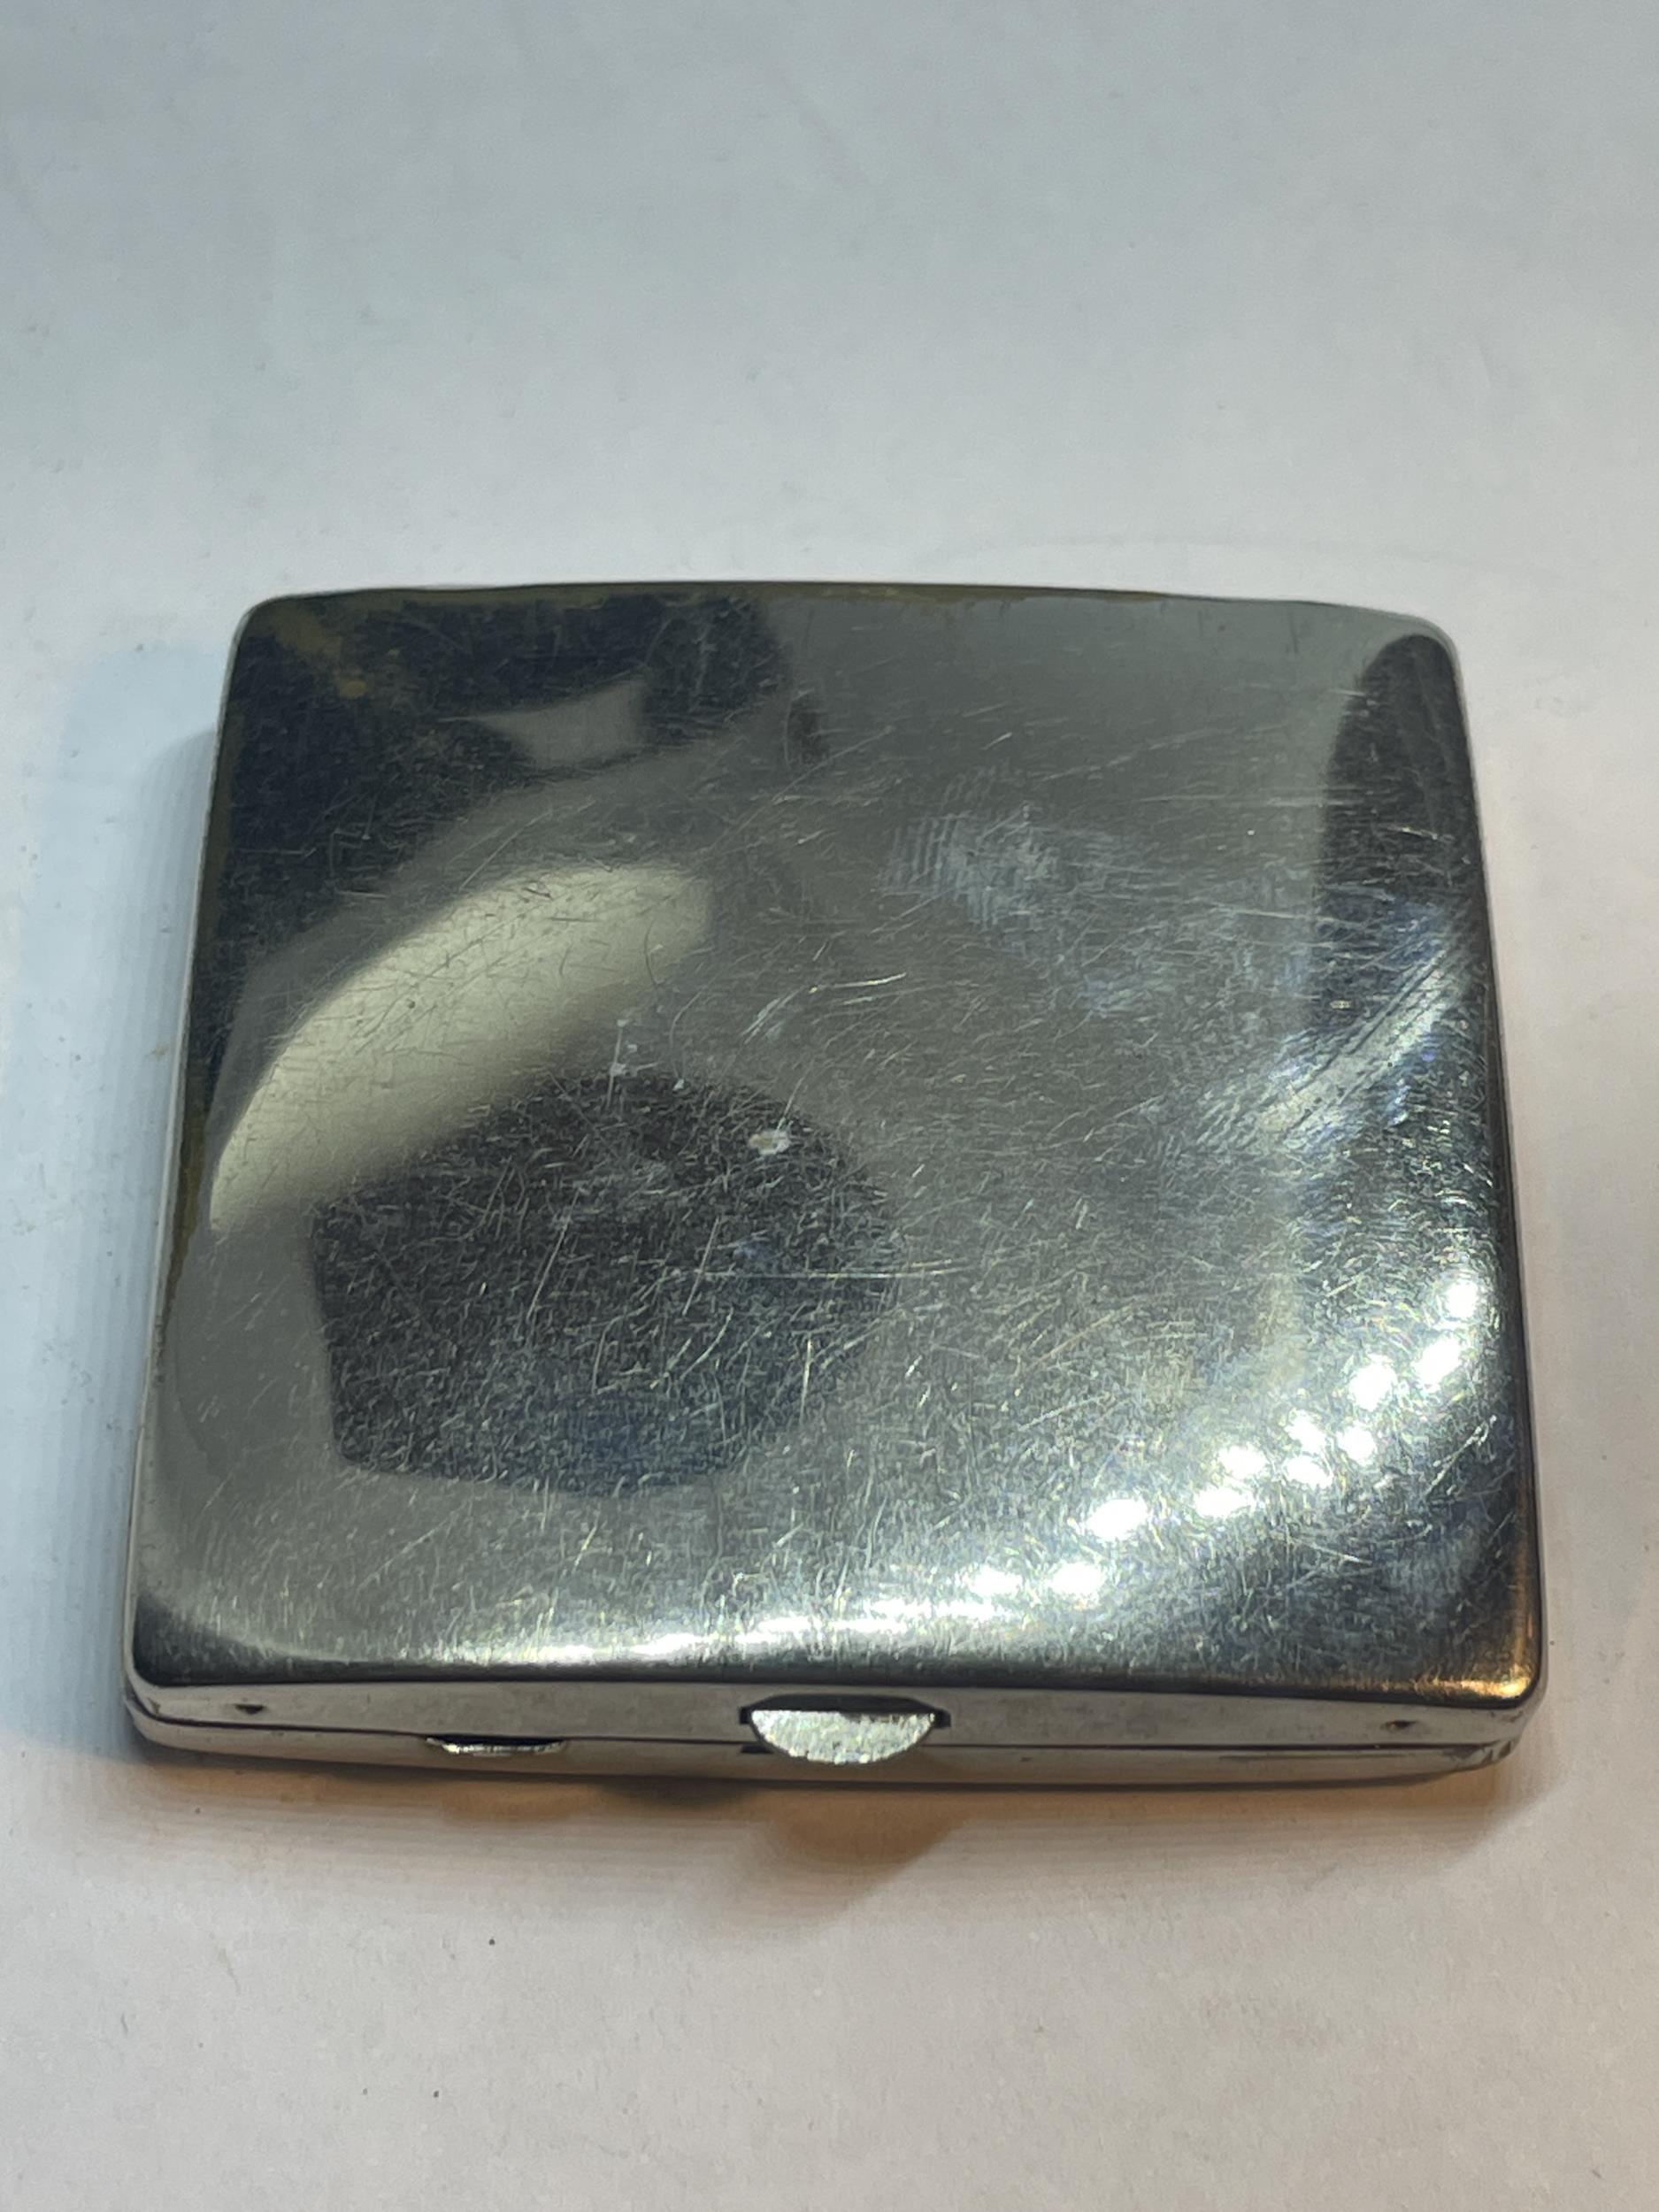 A VINTAGE YARDLEY POWDER COMPACT WITH INNER MIRROR - Image 4 of 4